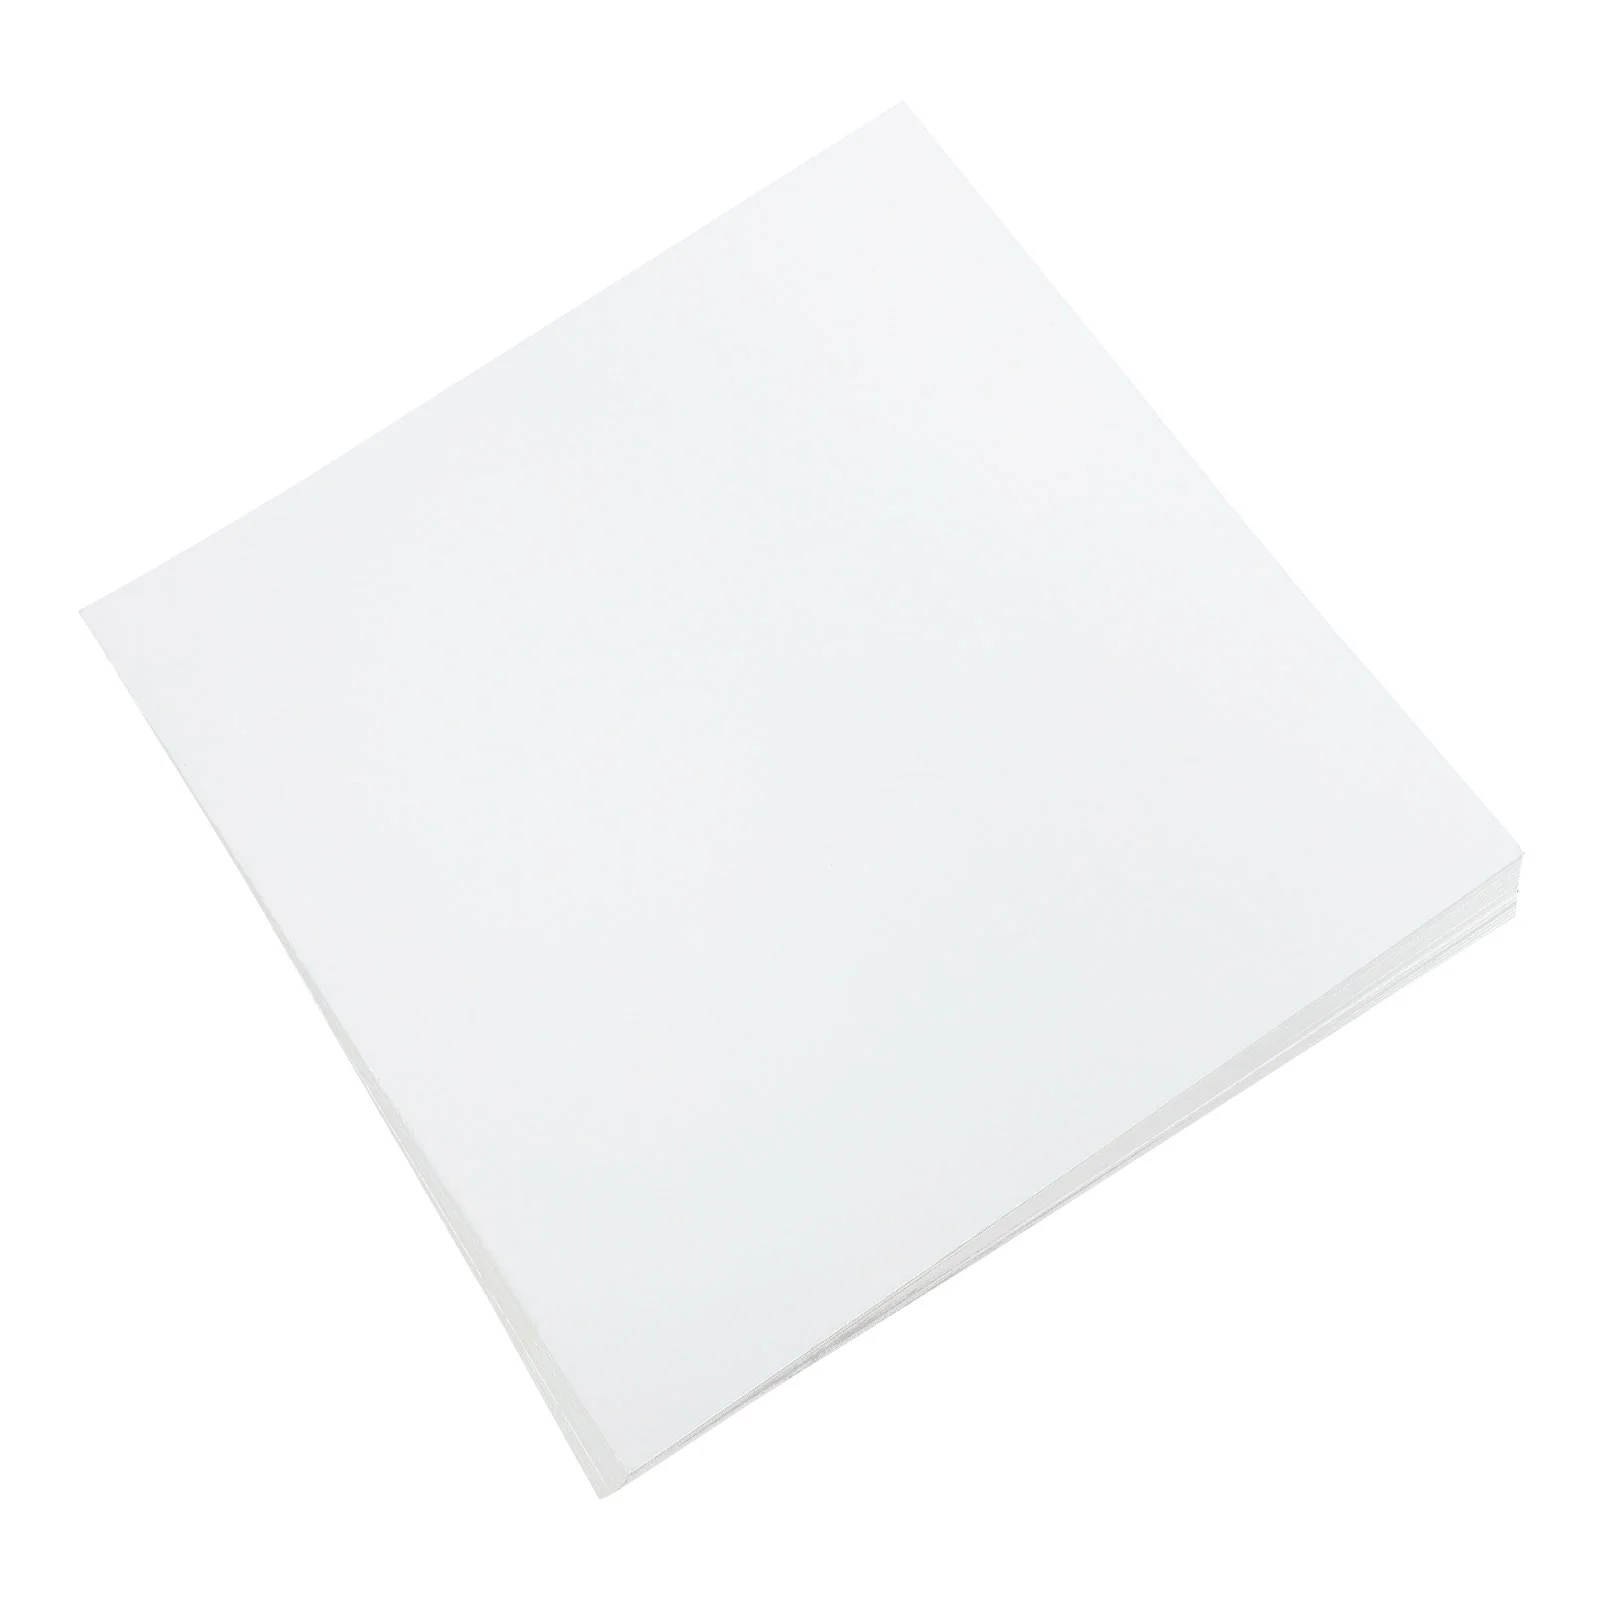 

30 Sheets Laboratory Filter Paper High Labs Absorbing Papers for Absorbent Experiment Filtering